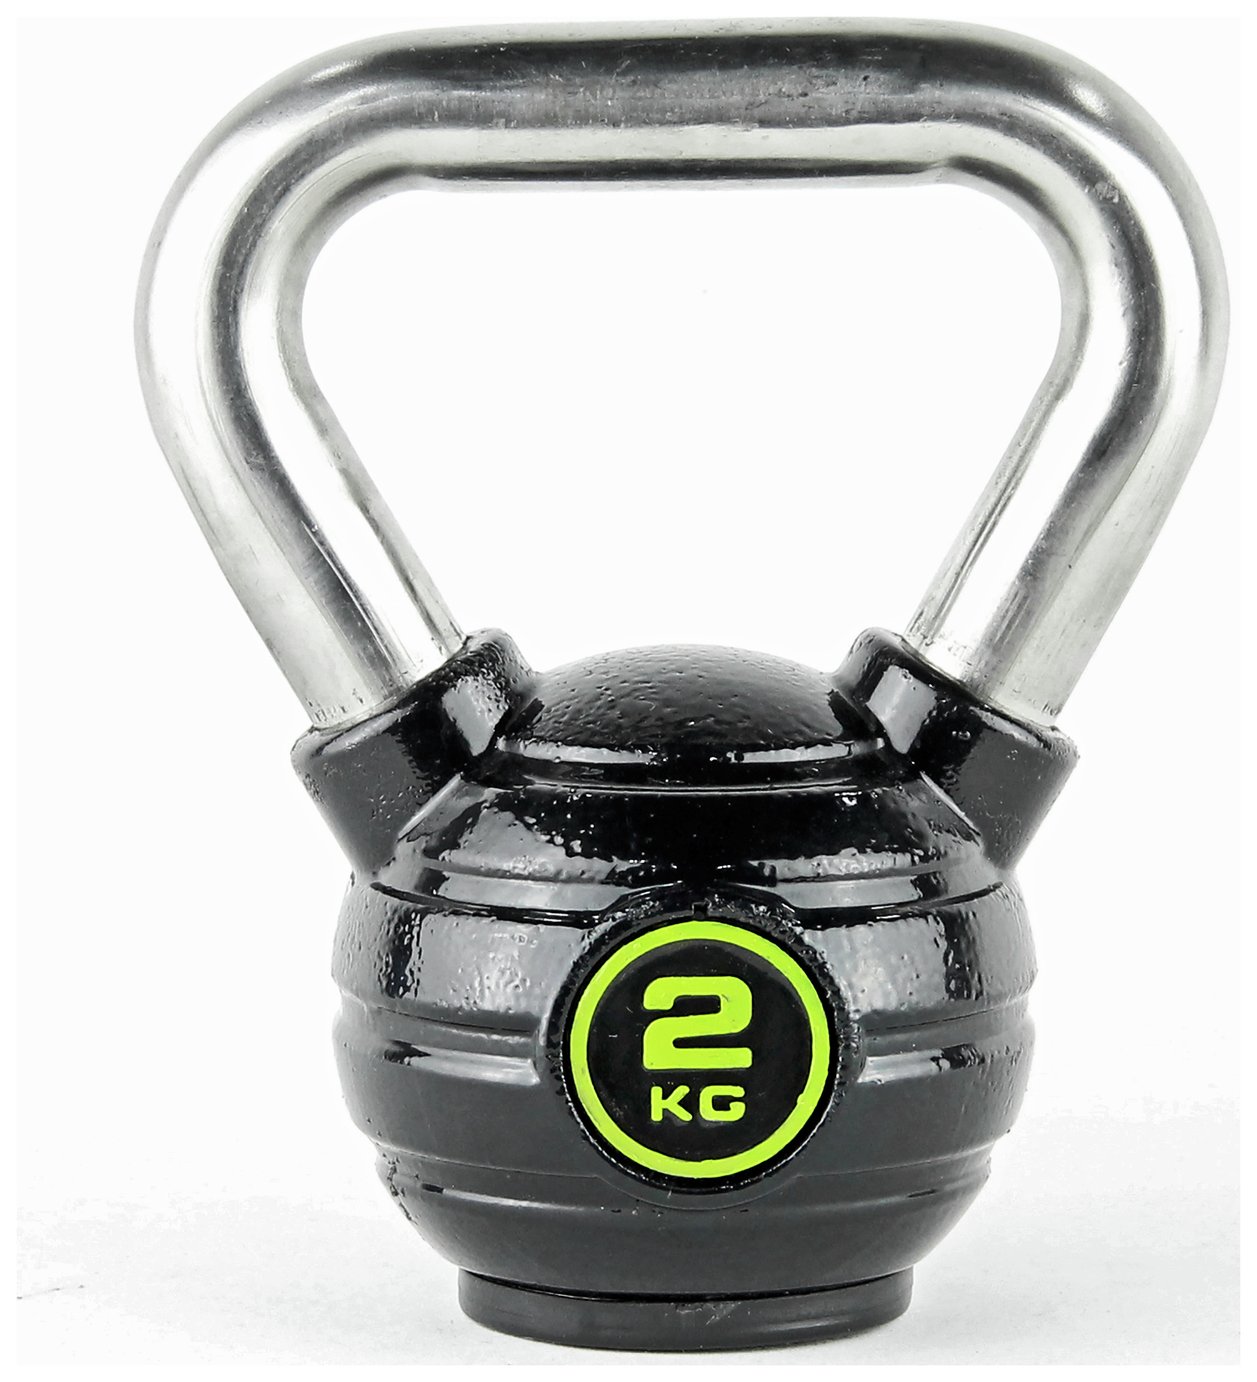 Opti Eco-Iron and Stainless Steel Kettlebell - 2kg